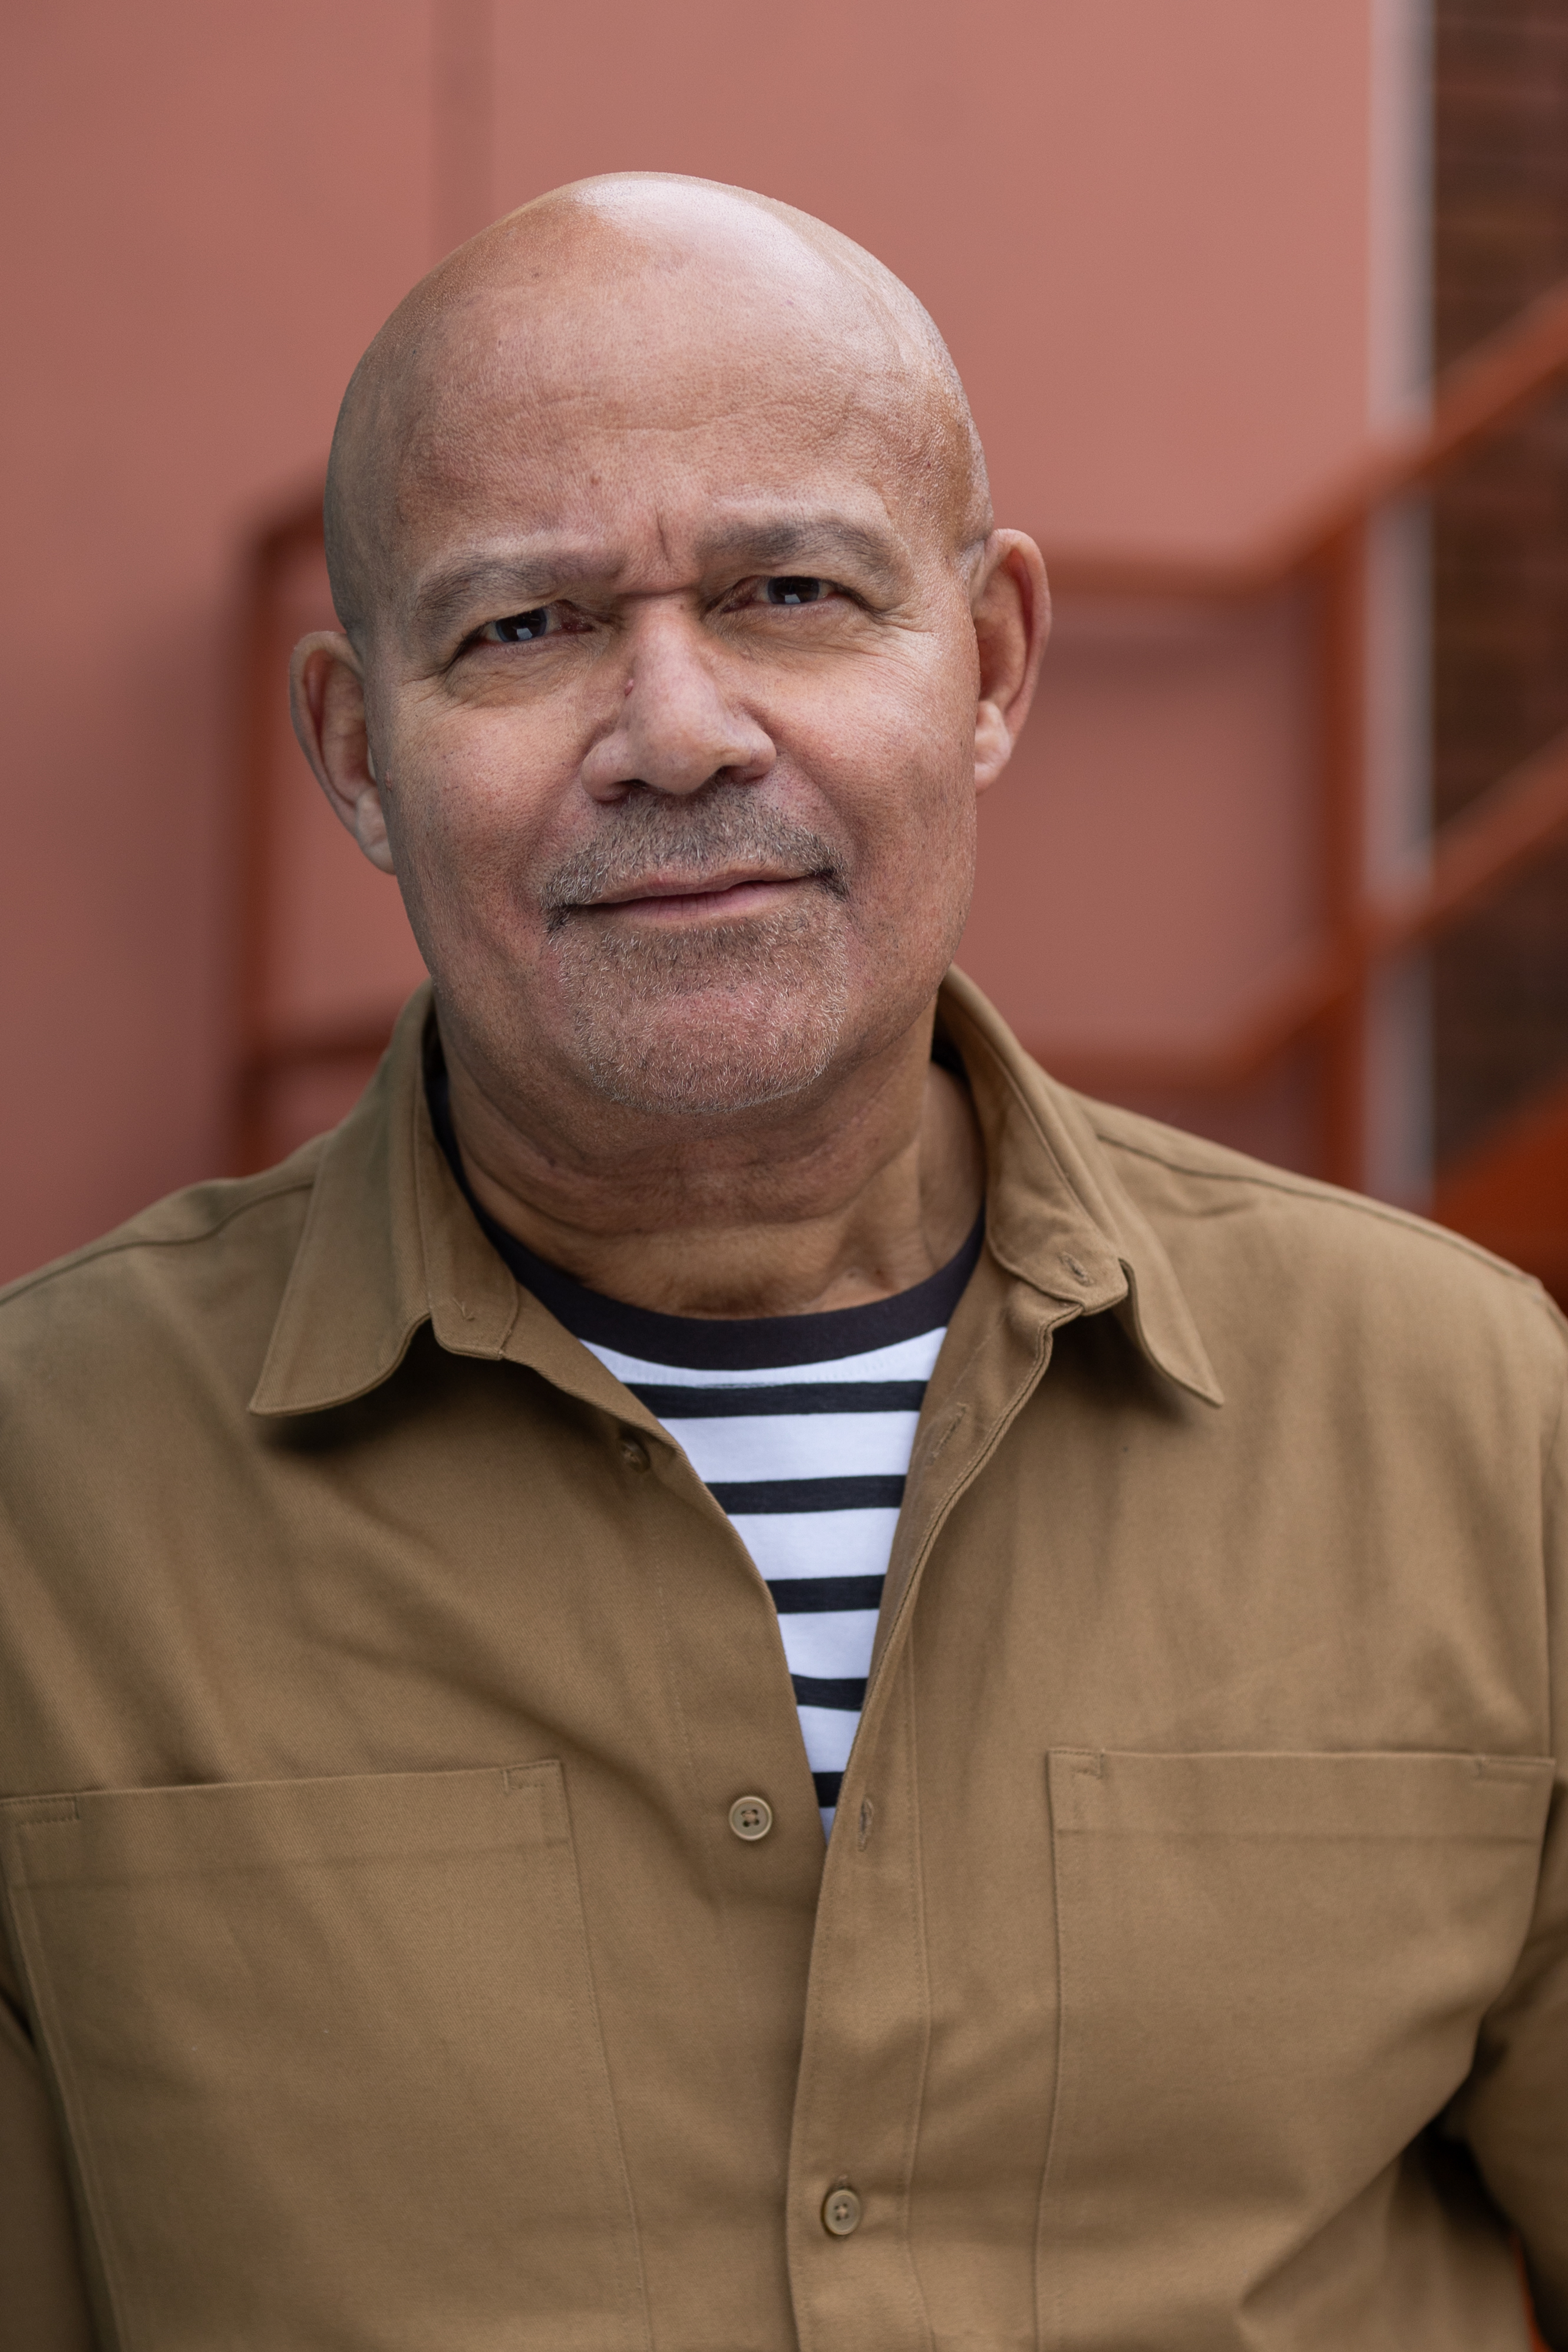 Donny Clark played by Louis Emerick.